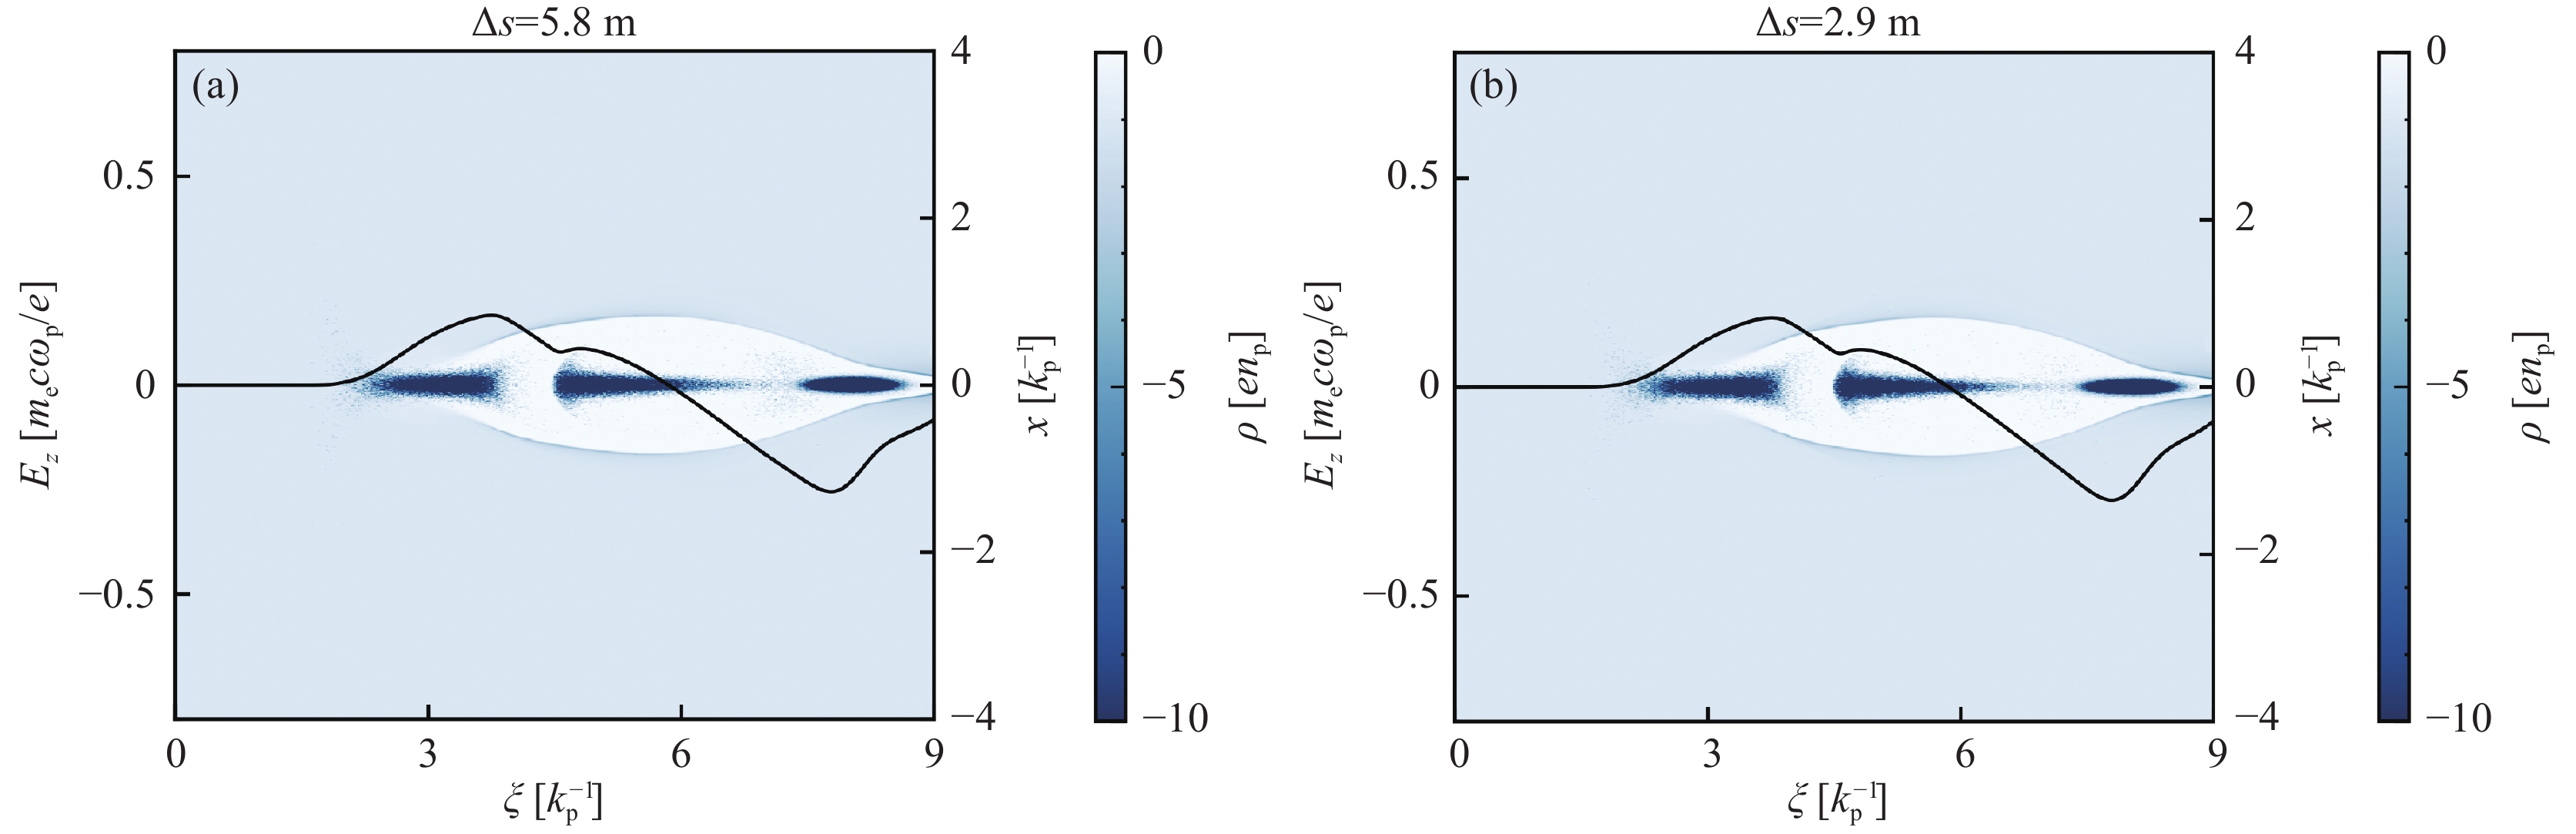 Wake structure in the plasma for (a) drive beam’s initial energy is 10 GeV and (b) drive beam’s initial energy is 5 GeV at the maximal acceleration distance of an acceleration at D = 2